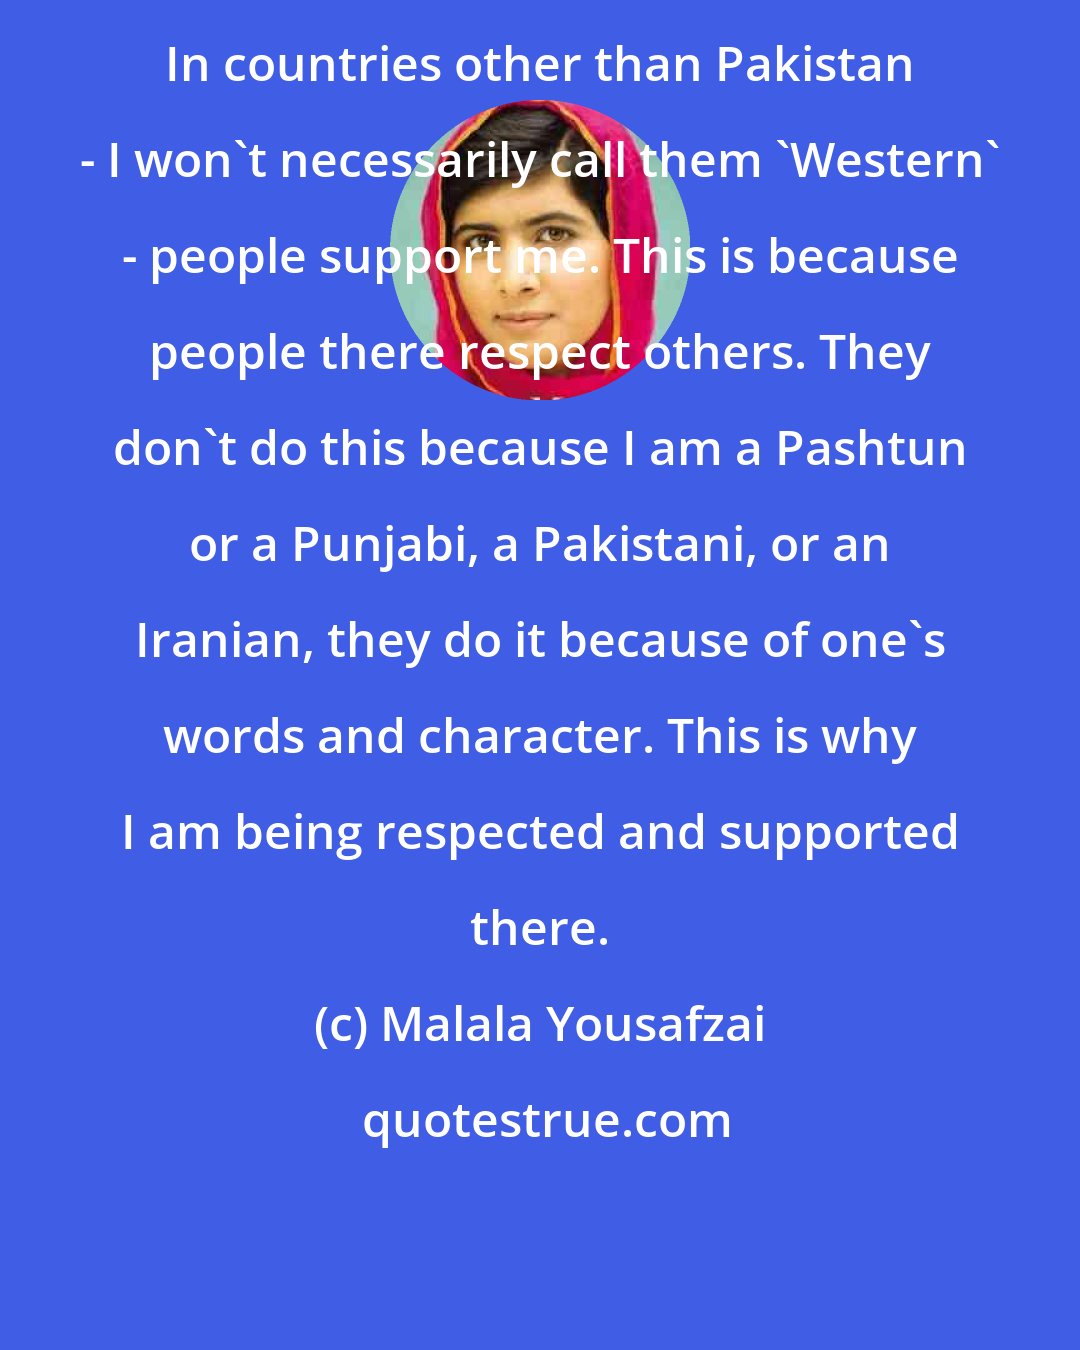 Malala Yousafzai: In countries other than Pakistan - I won't necessarily call them 'Western' - people support me. This is because people there respect others. They don't do this because I am a Pashtun or a Punjabi, a Pakistani, or an Iranian, they do it because of one's words and character. This is why I am being respected and supported there.